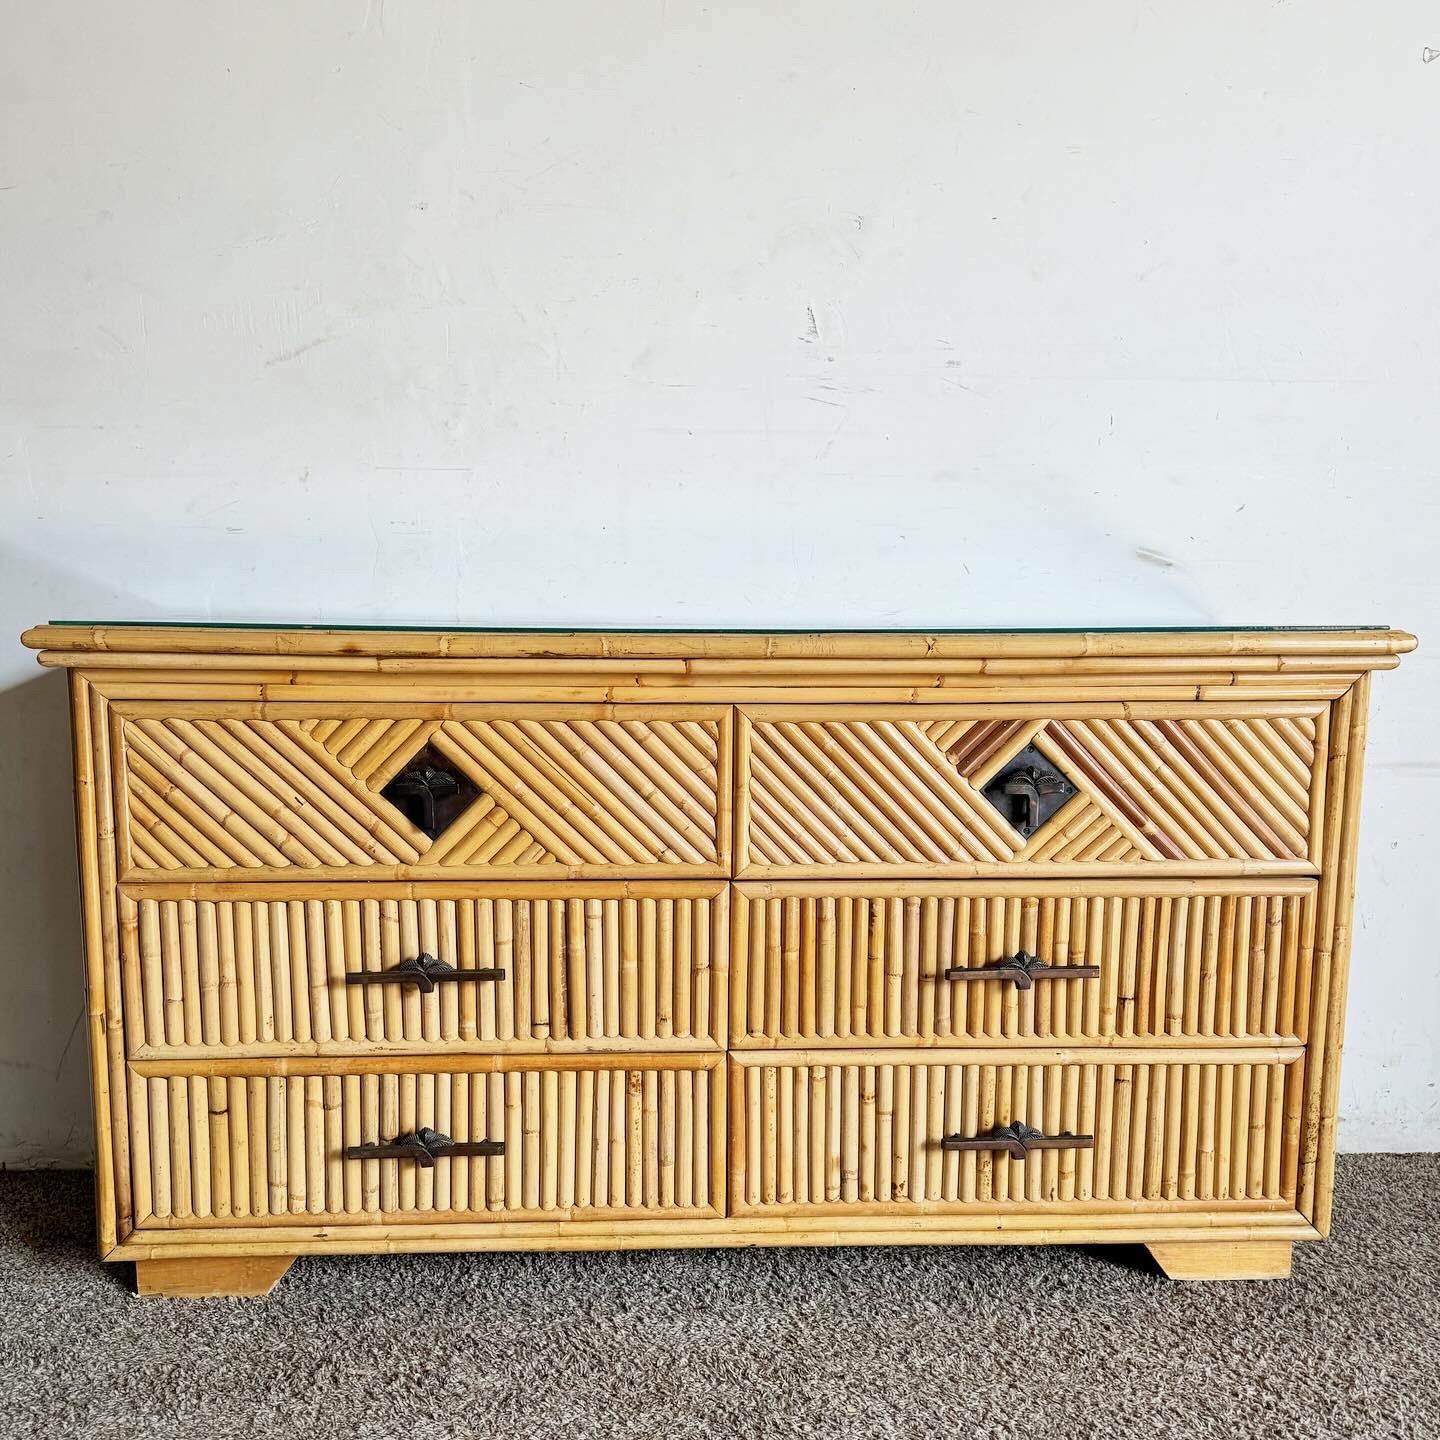 Late 20th Century Boho Chic Bamboo and Pencil Reed Credenza With Hut Hutch/Etagere/Caninet For Sale